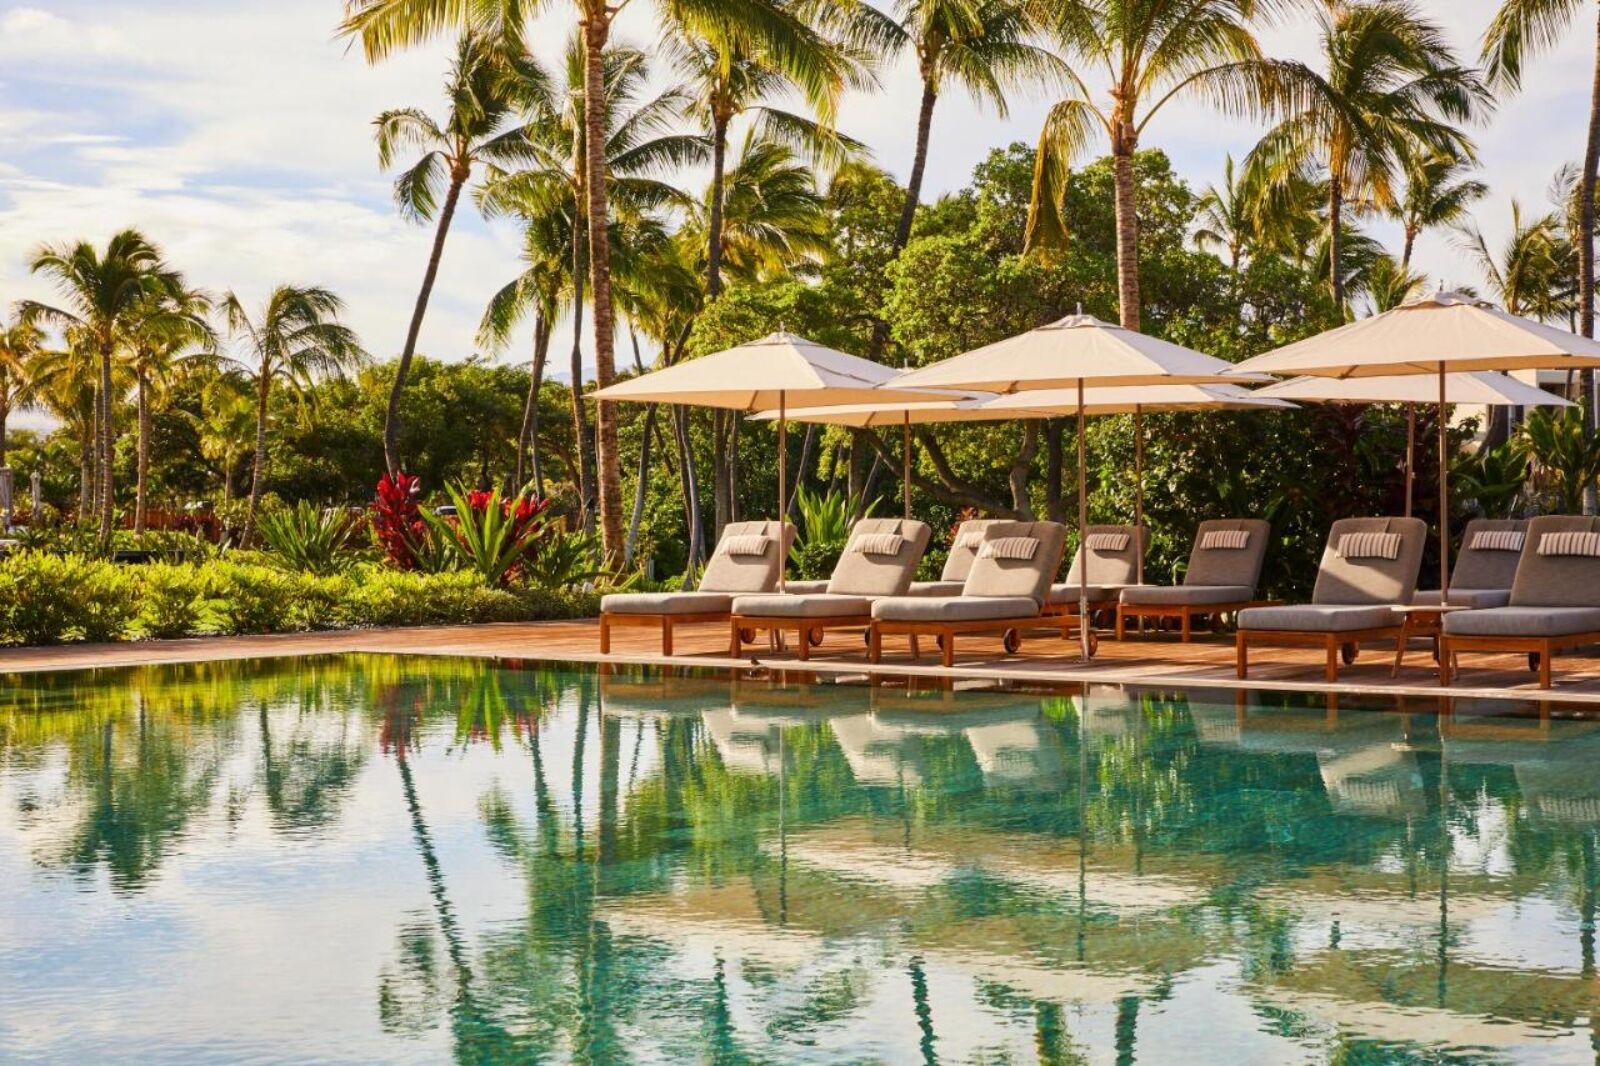 Pool at Mauna Lani, Auberge Resorts Collection one of the best hawaii resorts